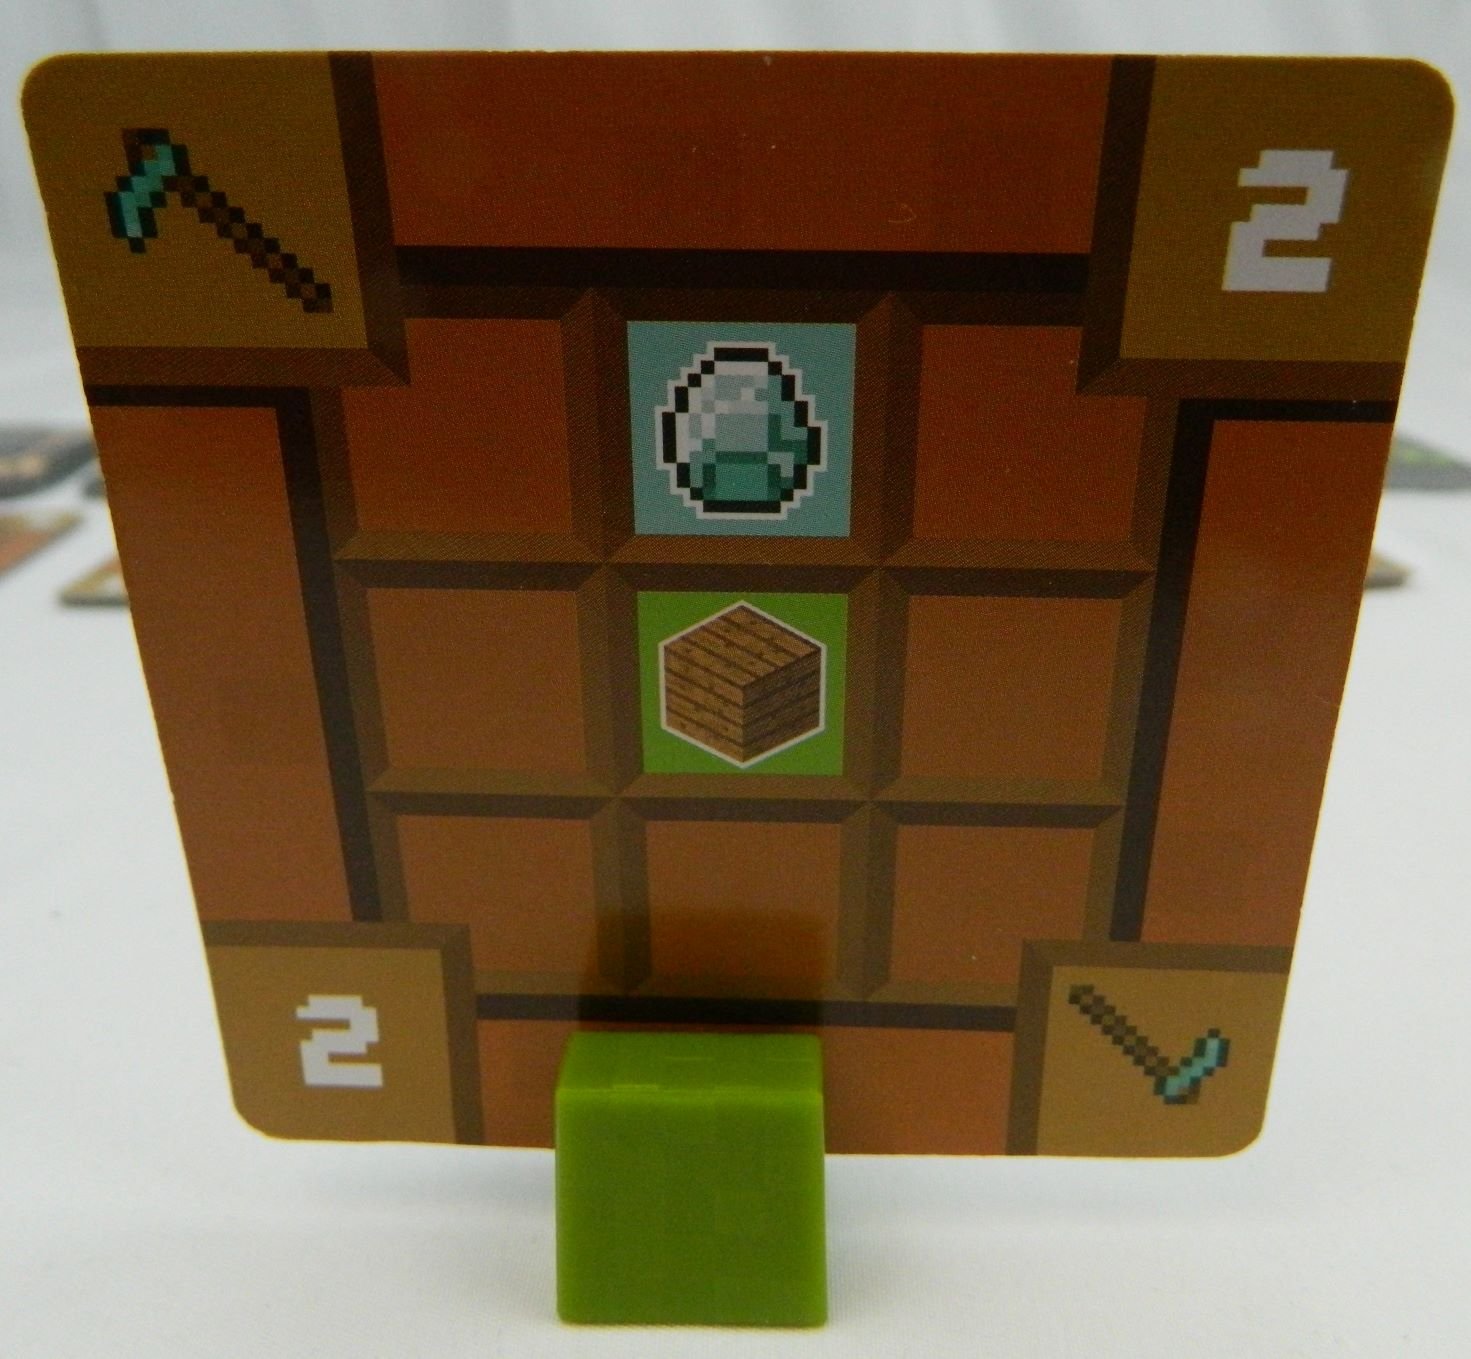 Minecraft Card Game Race Your Friends to Craft Valuable Tools Ages 8+